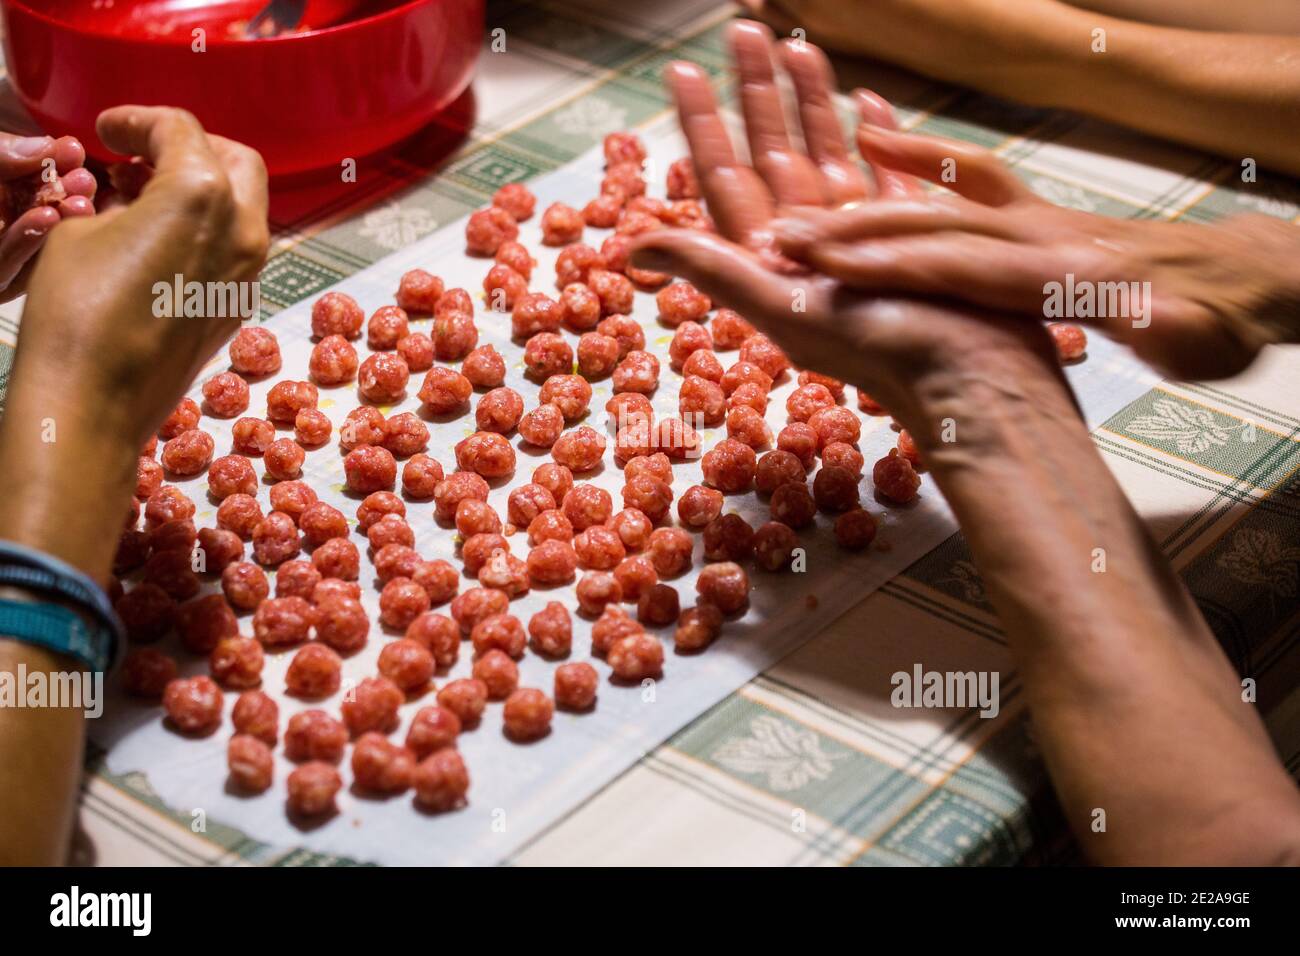 Two people prepare raw meatballs, roll them up with their hands and are ready to be cooked. Meatballs. meat ball, meat ball. Stock Photo